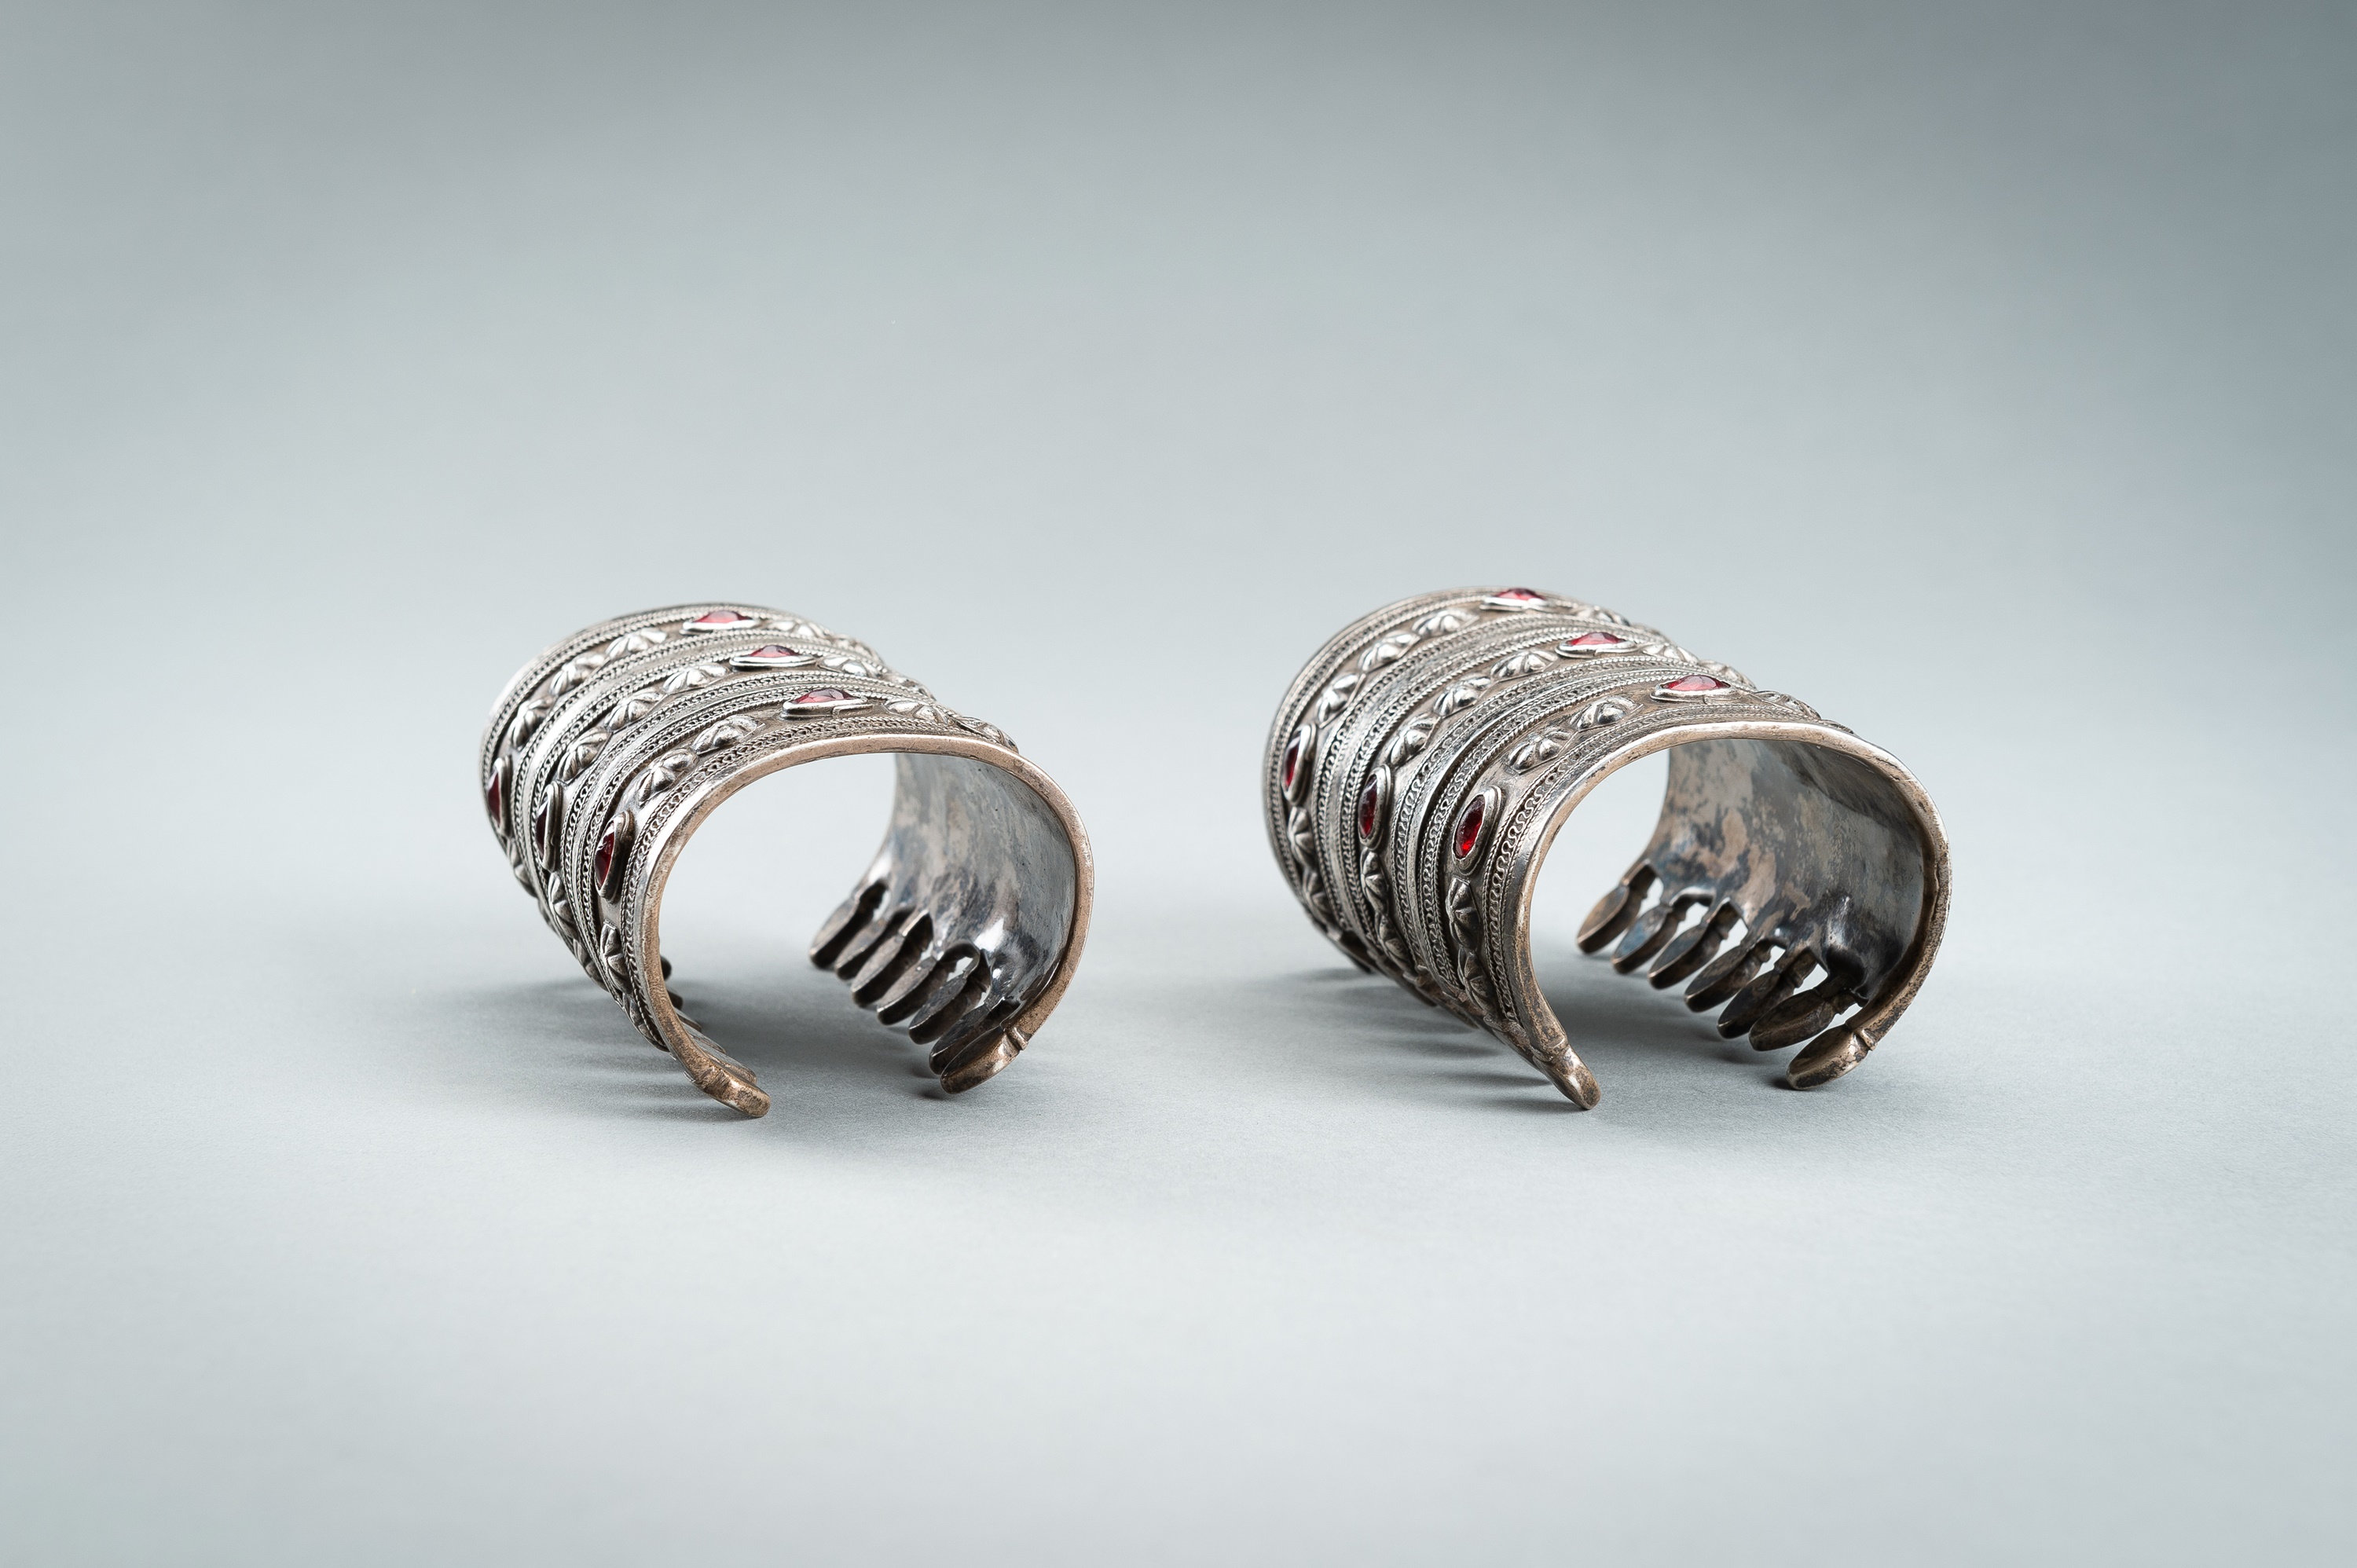 A PAIR OF TURKOMAN GLASS INSET SILVER BRACELETS, c. 1900s - Image 10 of 12